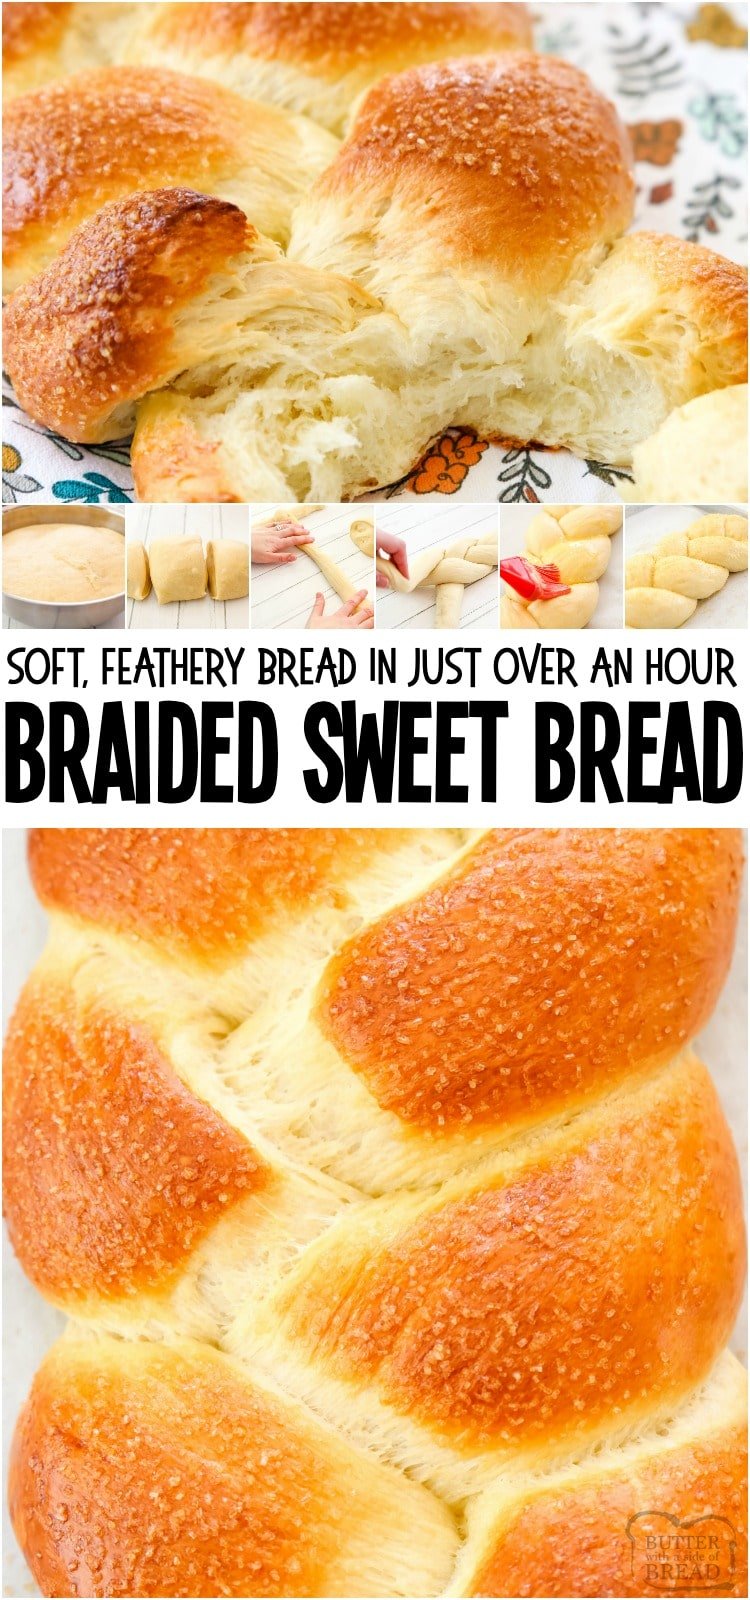 Braided sweet bread is a delicious and gorgeous homemade bread that looks as good as it tastes. With a sweetened golden top crust and fluffy bread inside, you’re going to love this sweet bread recipe.